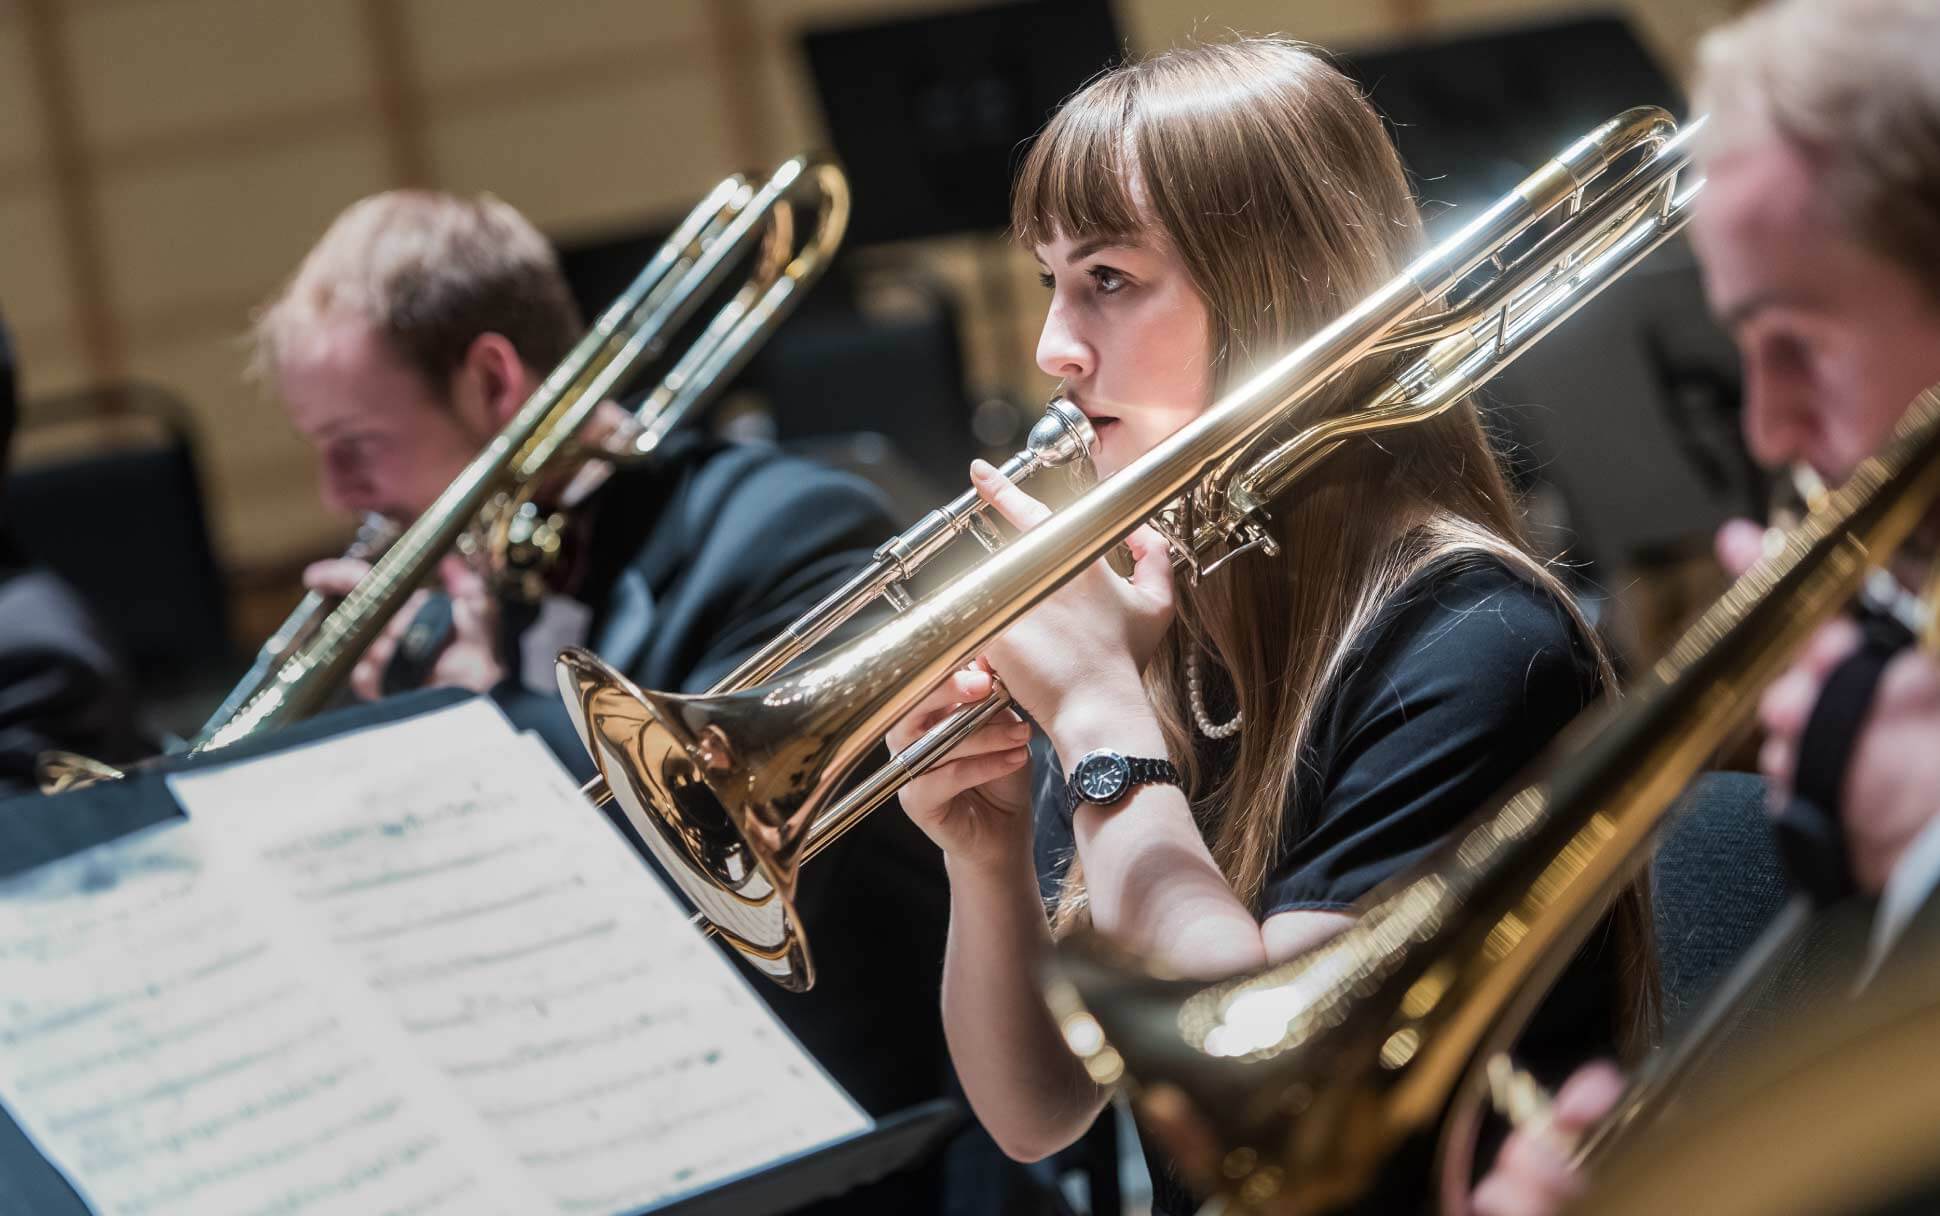 A student of UBC's School of Music plays a trombone at a public recital